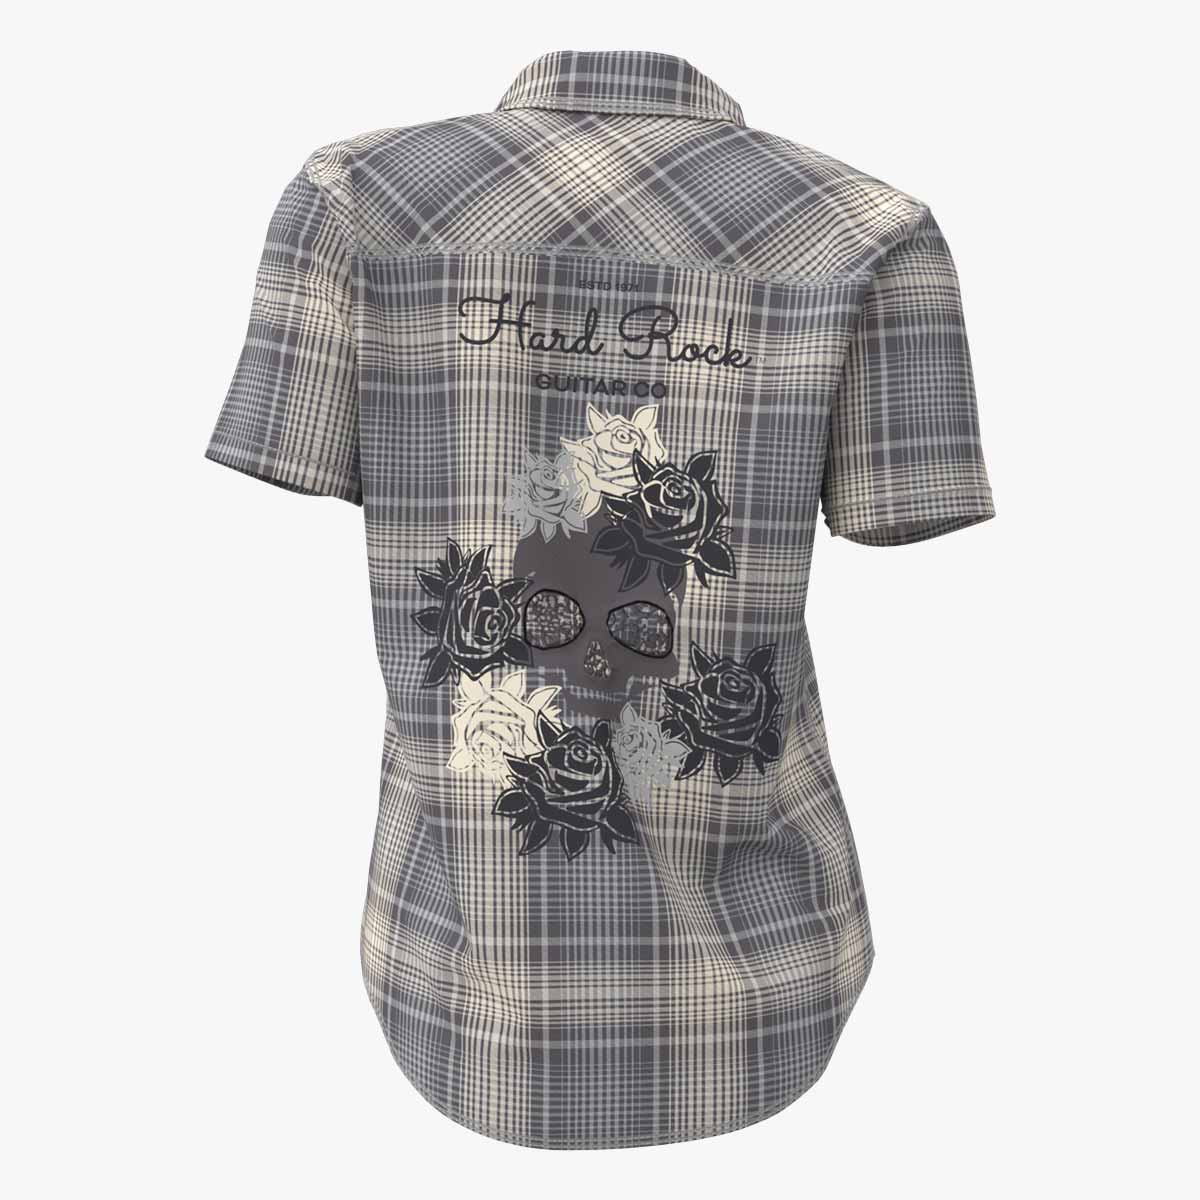 Guitar Company Plaid Shirt with Back Design image number 2